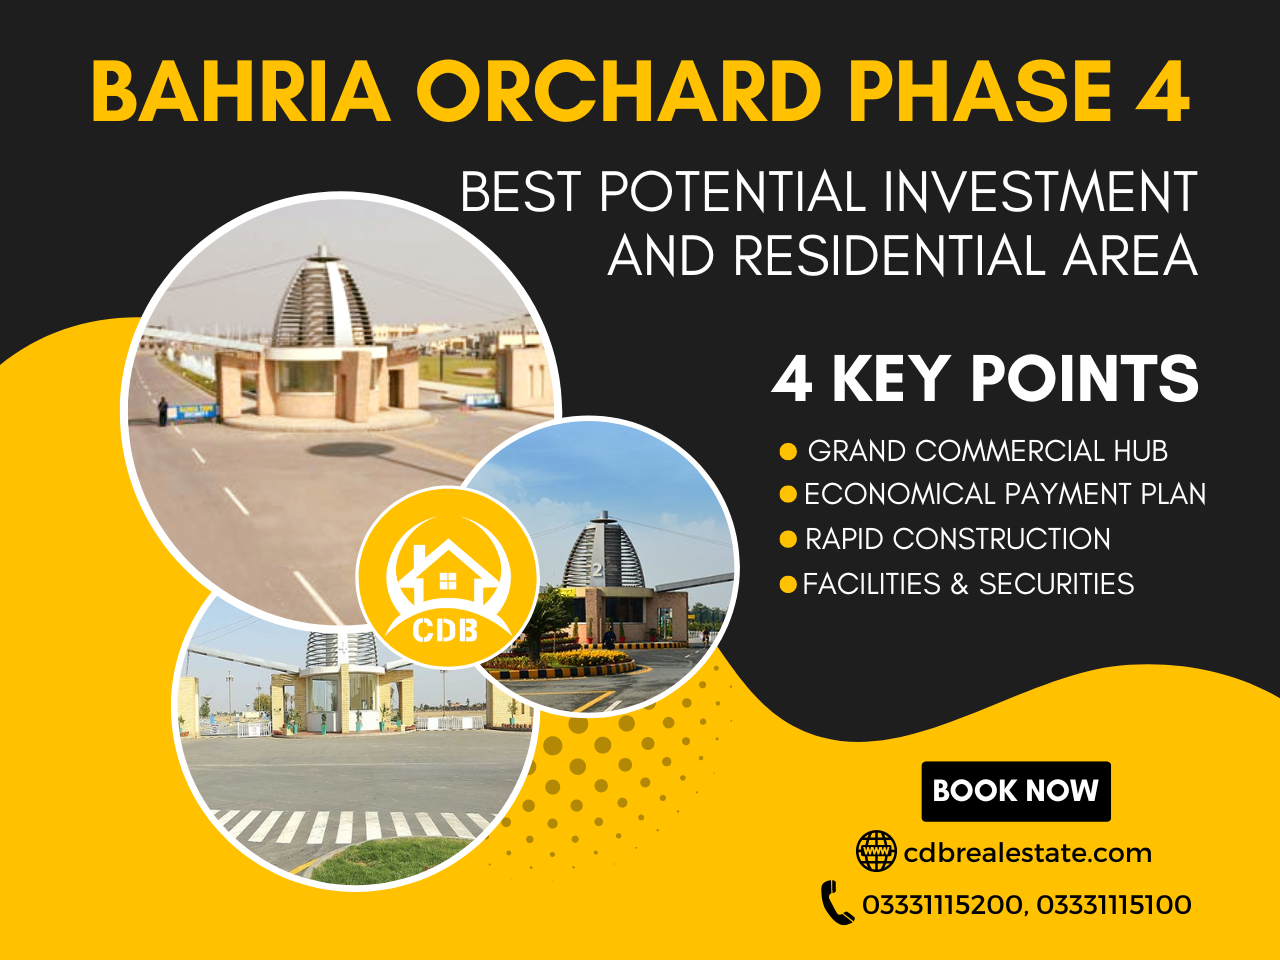 4 Key Points that Make Bahria Orchard Phase 4 Lahore the Best Potential Investment and Residential Area